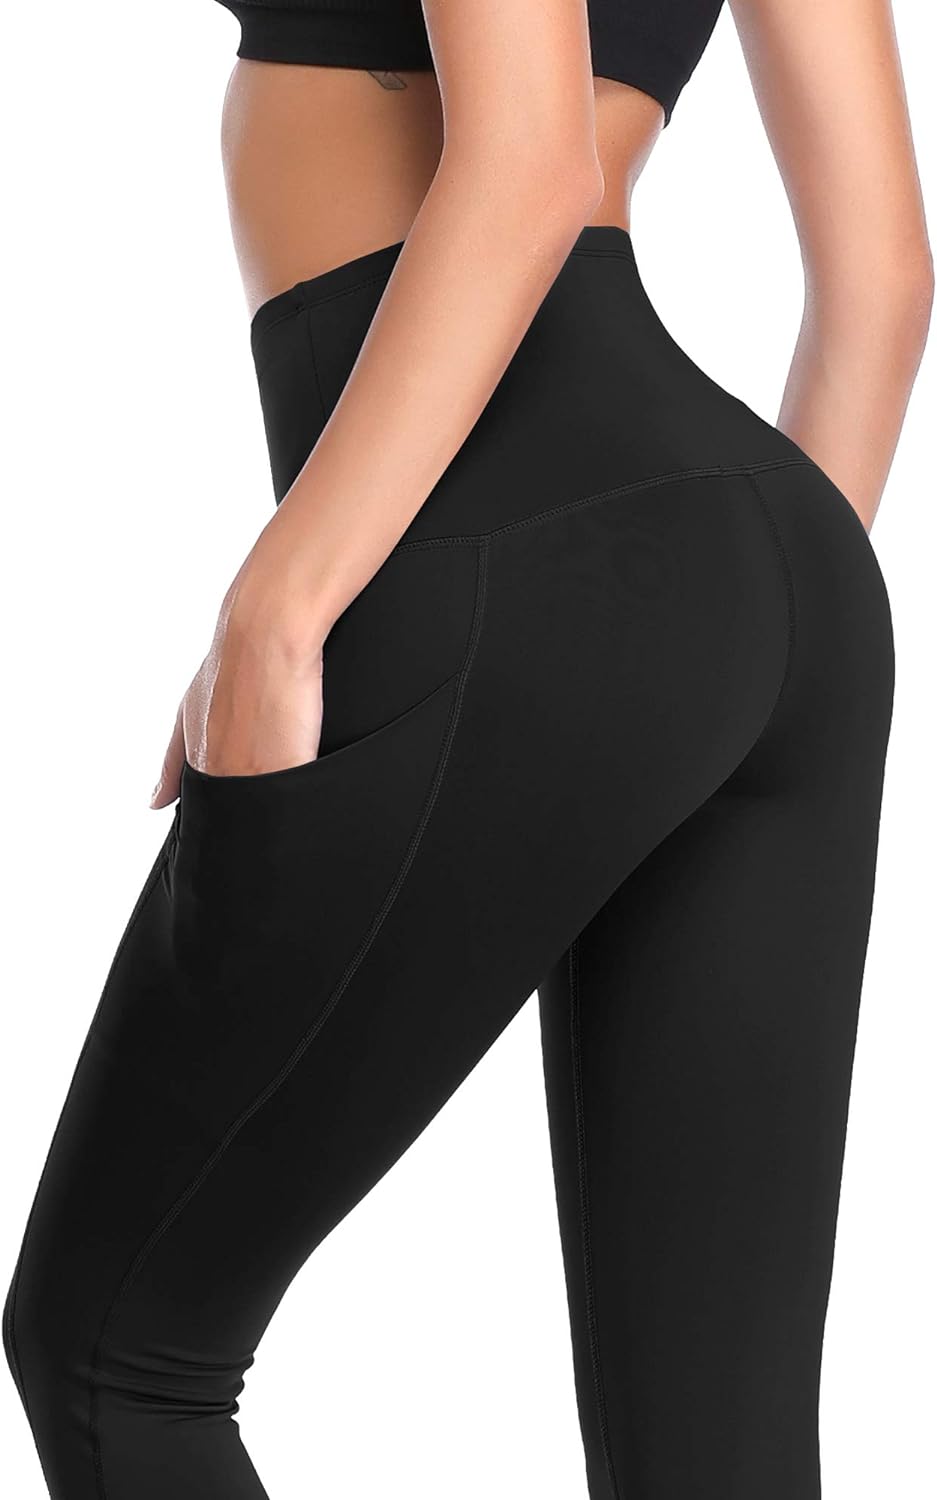 CADMUS Womens High Waist Tummy Control Workout Leggings with Pockets 